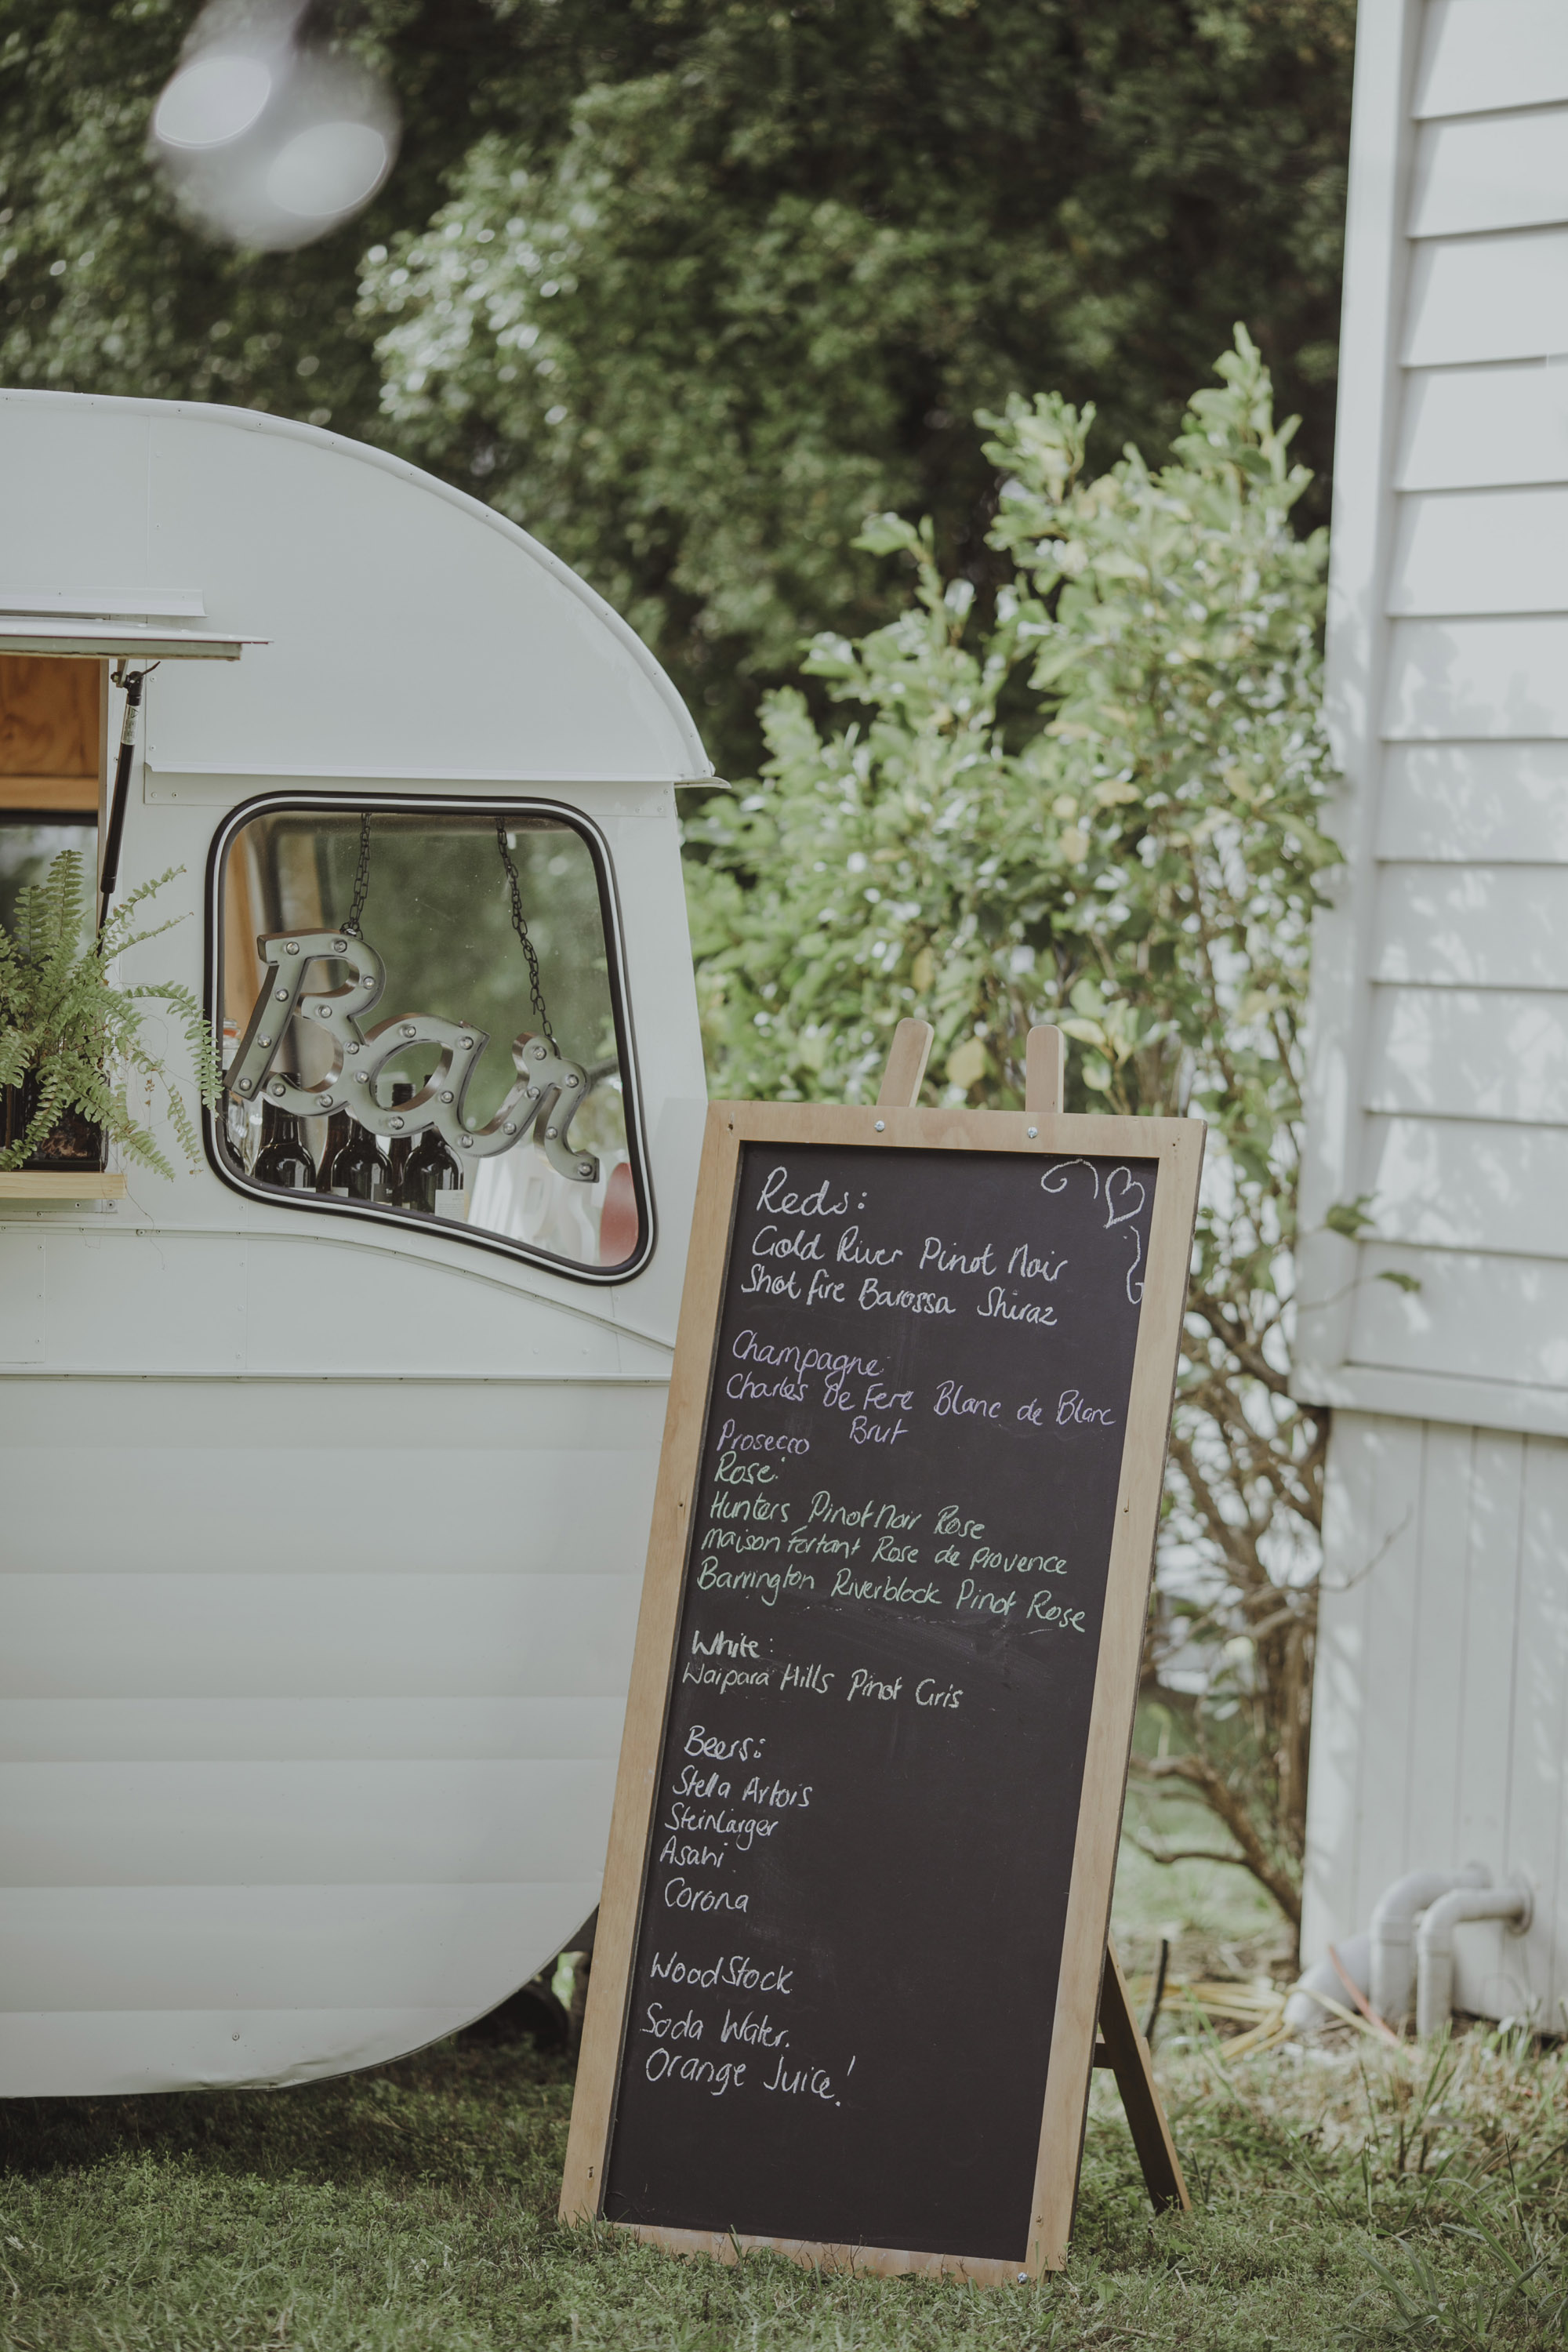 44 A low key New Zealand Estate wedding with a bohemian vintage vibe